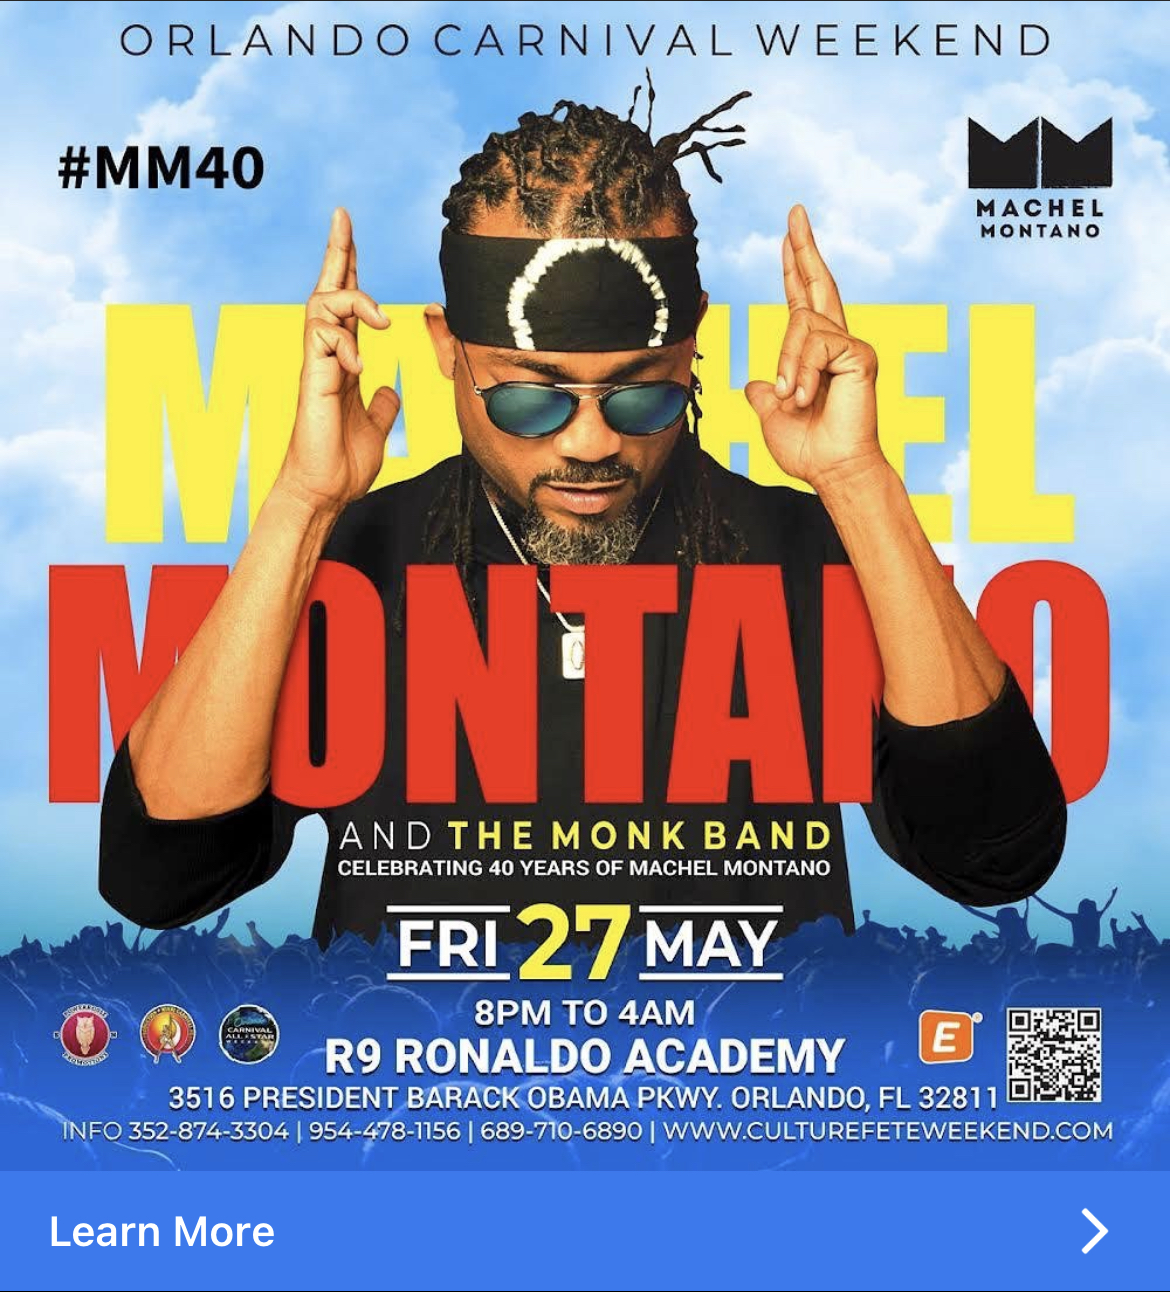 Machel Montano and the Monk Band - Orlando Carnival Weekend